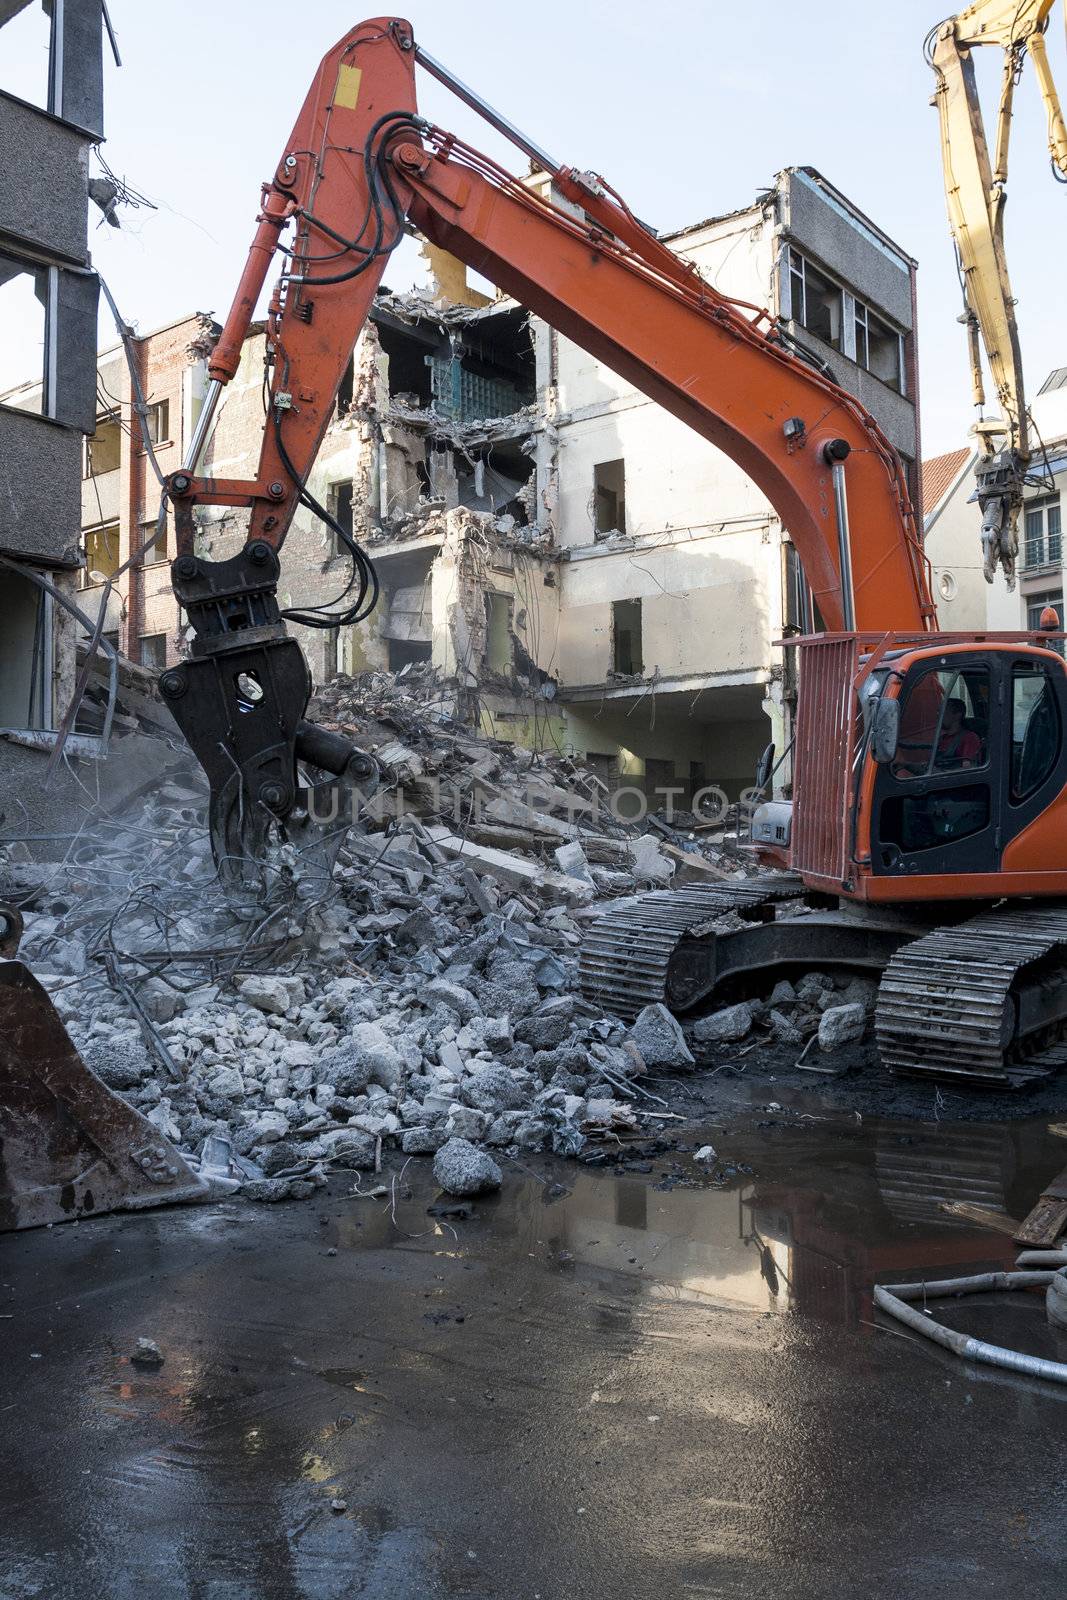 Demolition of an old building with heavy machinery for new construction